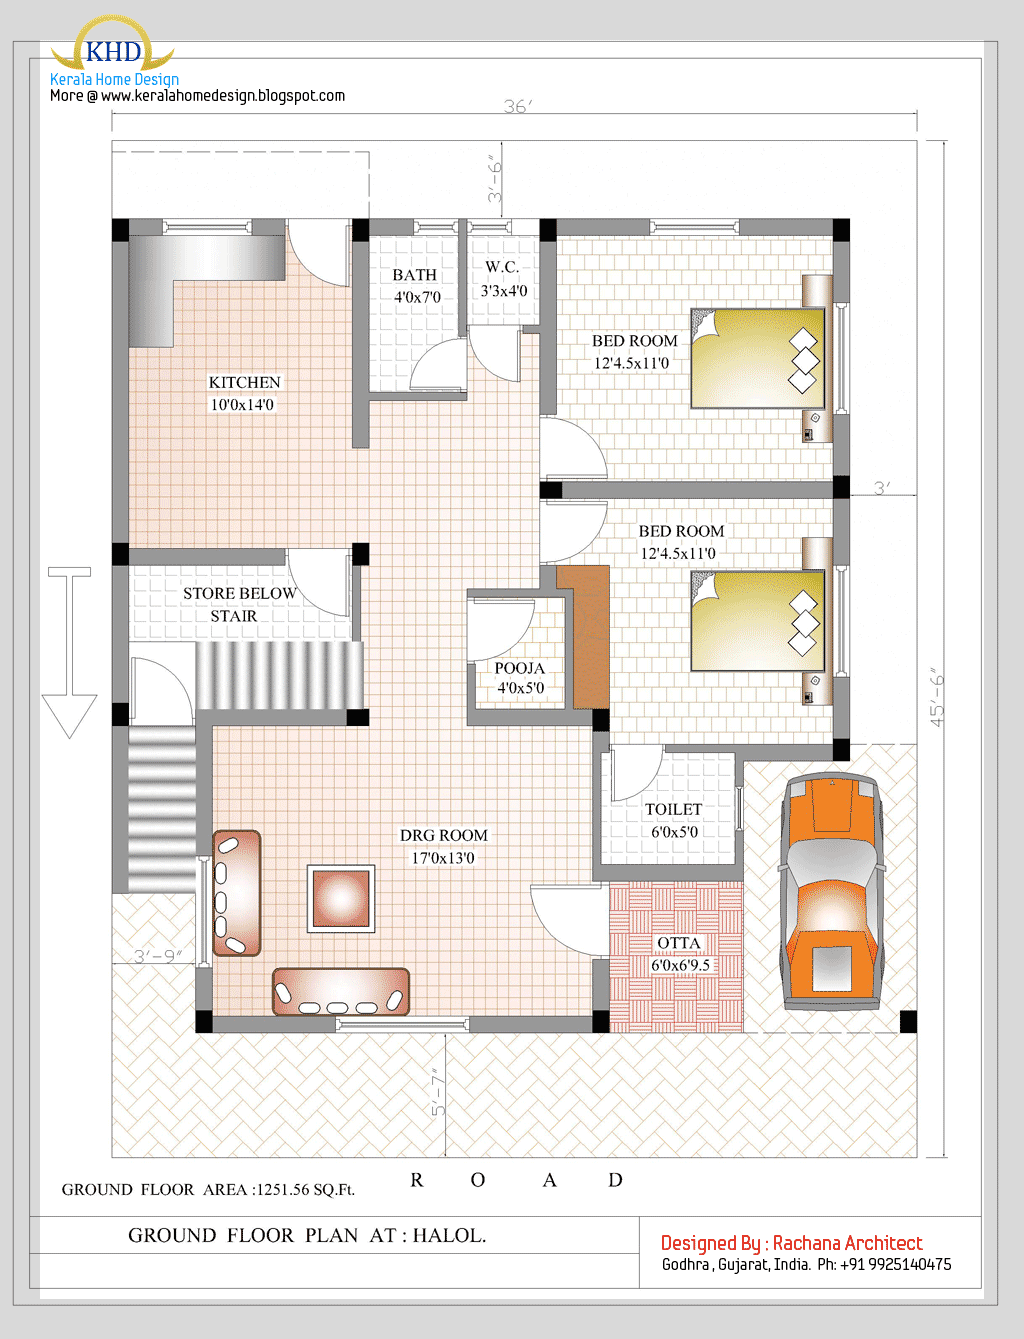  Duplex  House  Plan  and Elevation  2349 Sq Ft home  